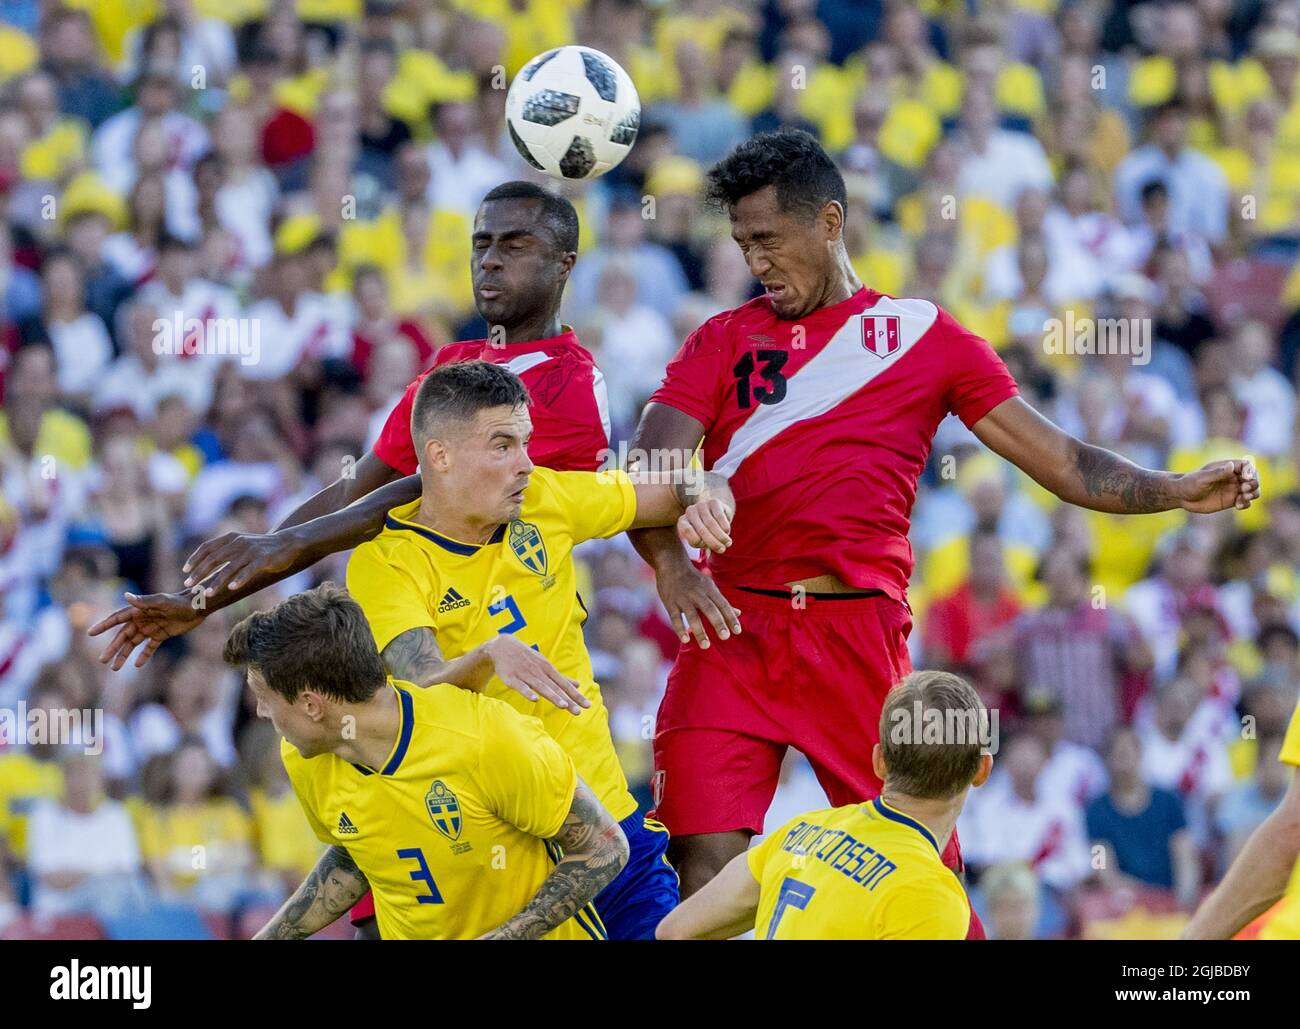 Perus Christian Ramos (top L) and Renato Tapia (top R) fight for the ball with Sweden's Mikael Lustig (C, nr 2) and Victor Nilsson Lindelof (nr 3) during the international friendly soccer match between Sweden and Peru at the Ullevi stadium i Gothenburg, Sweden, on June 9, 2018. Photo: Adam Ihse / TT / code 9200  Stock Photo